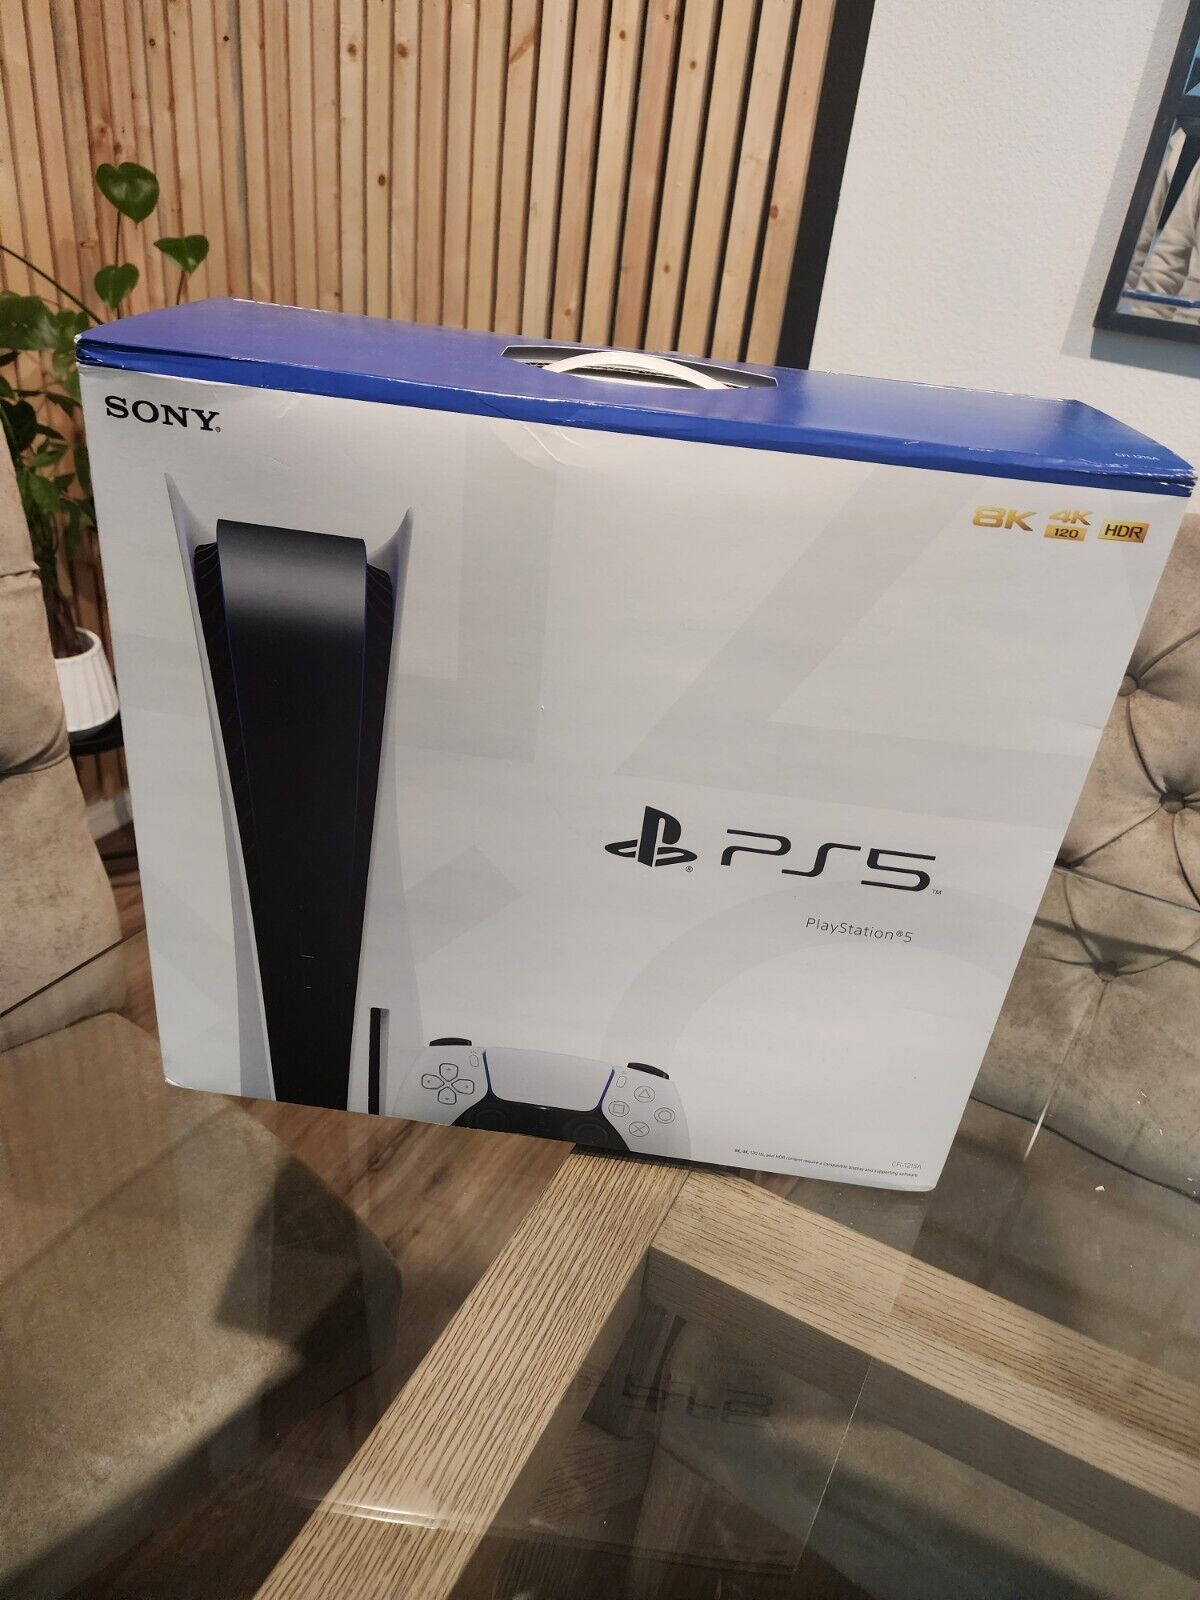 ☑️ NEW Sony Playstation PS 5 Console Disc System SEALED (Ships Next Day) ☑️